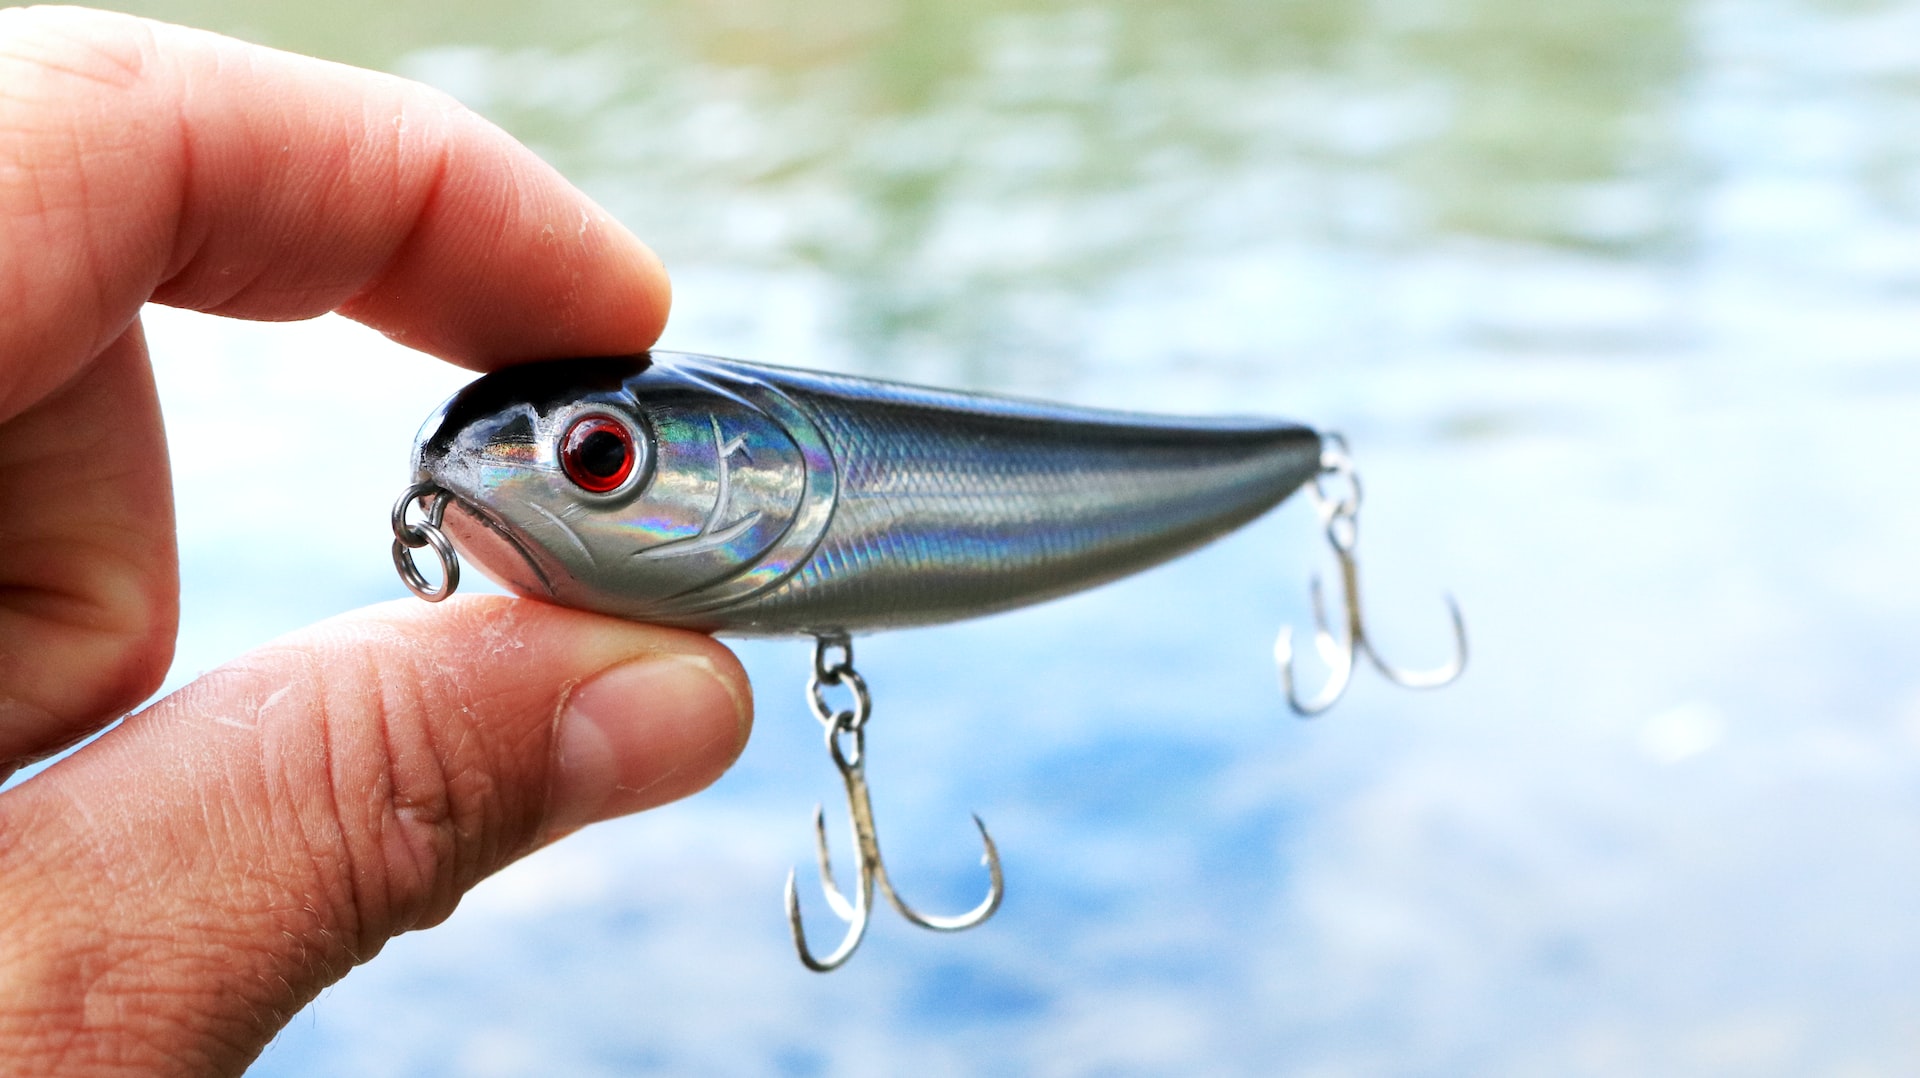 5 Best Surf Fishing Lures: Best of the Baits